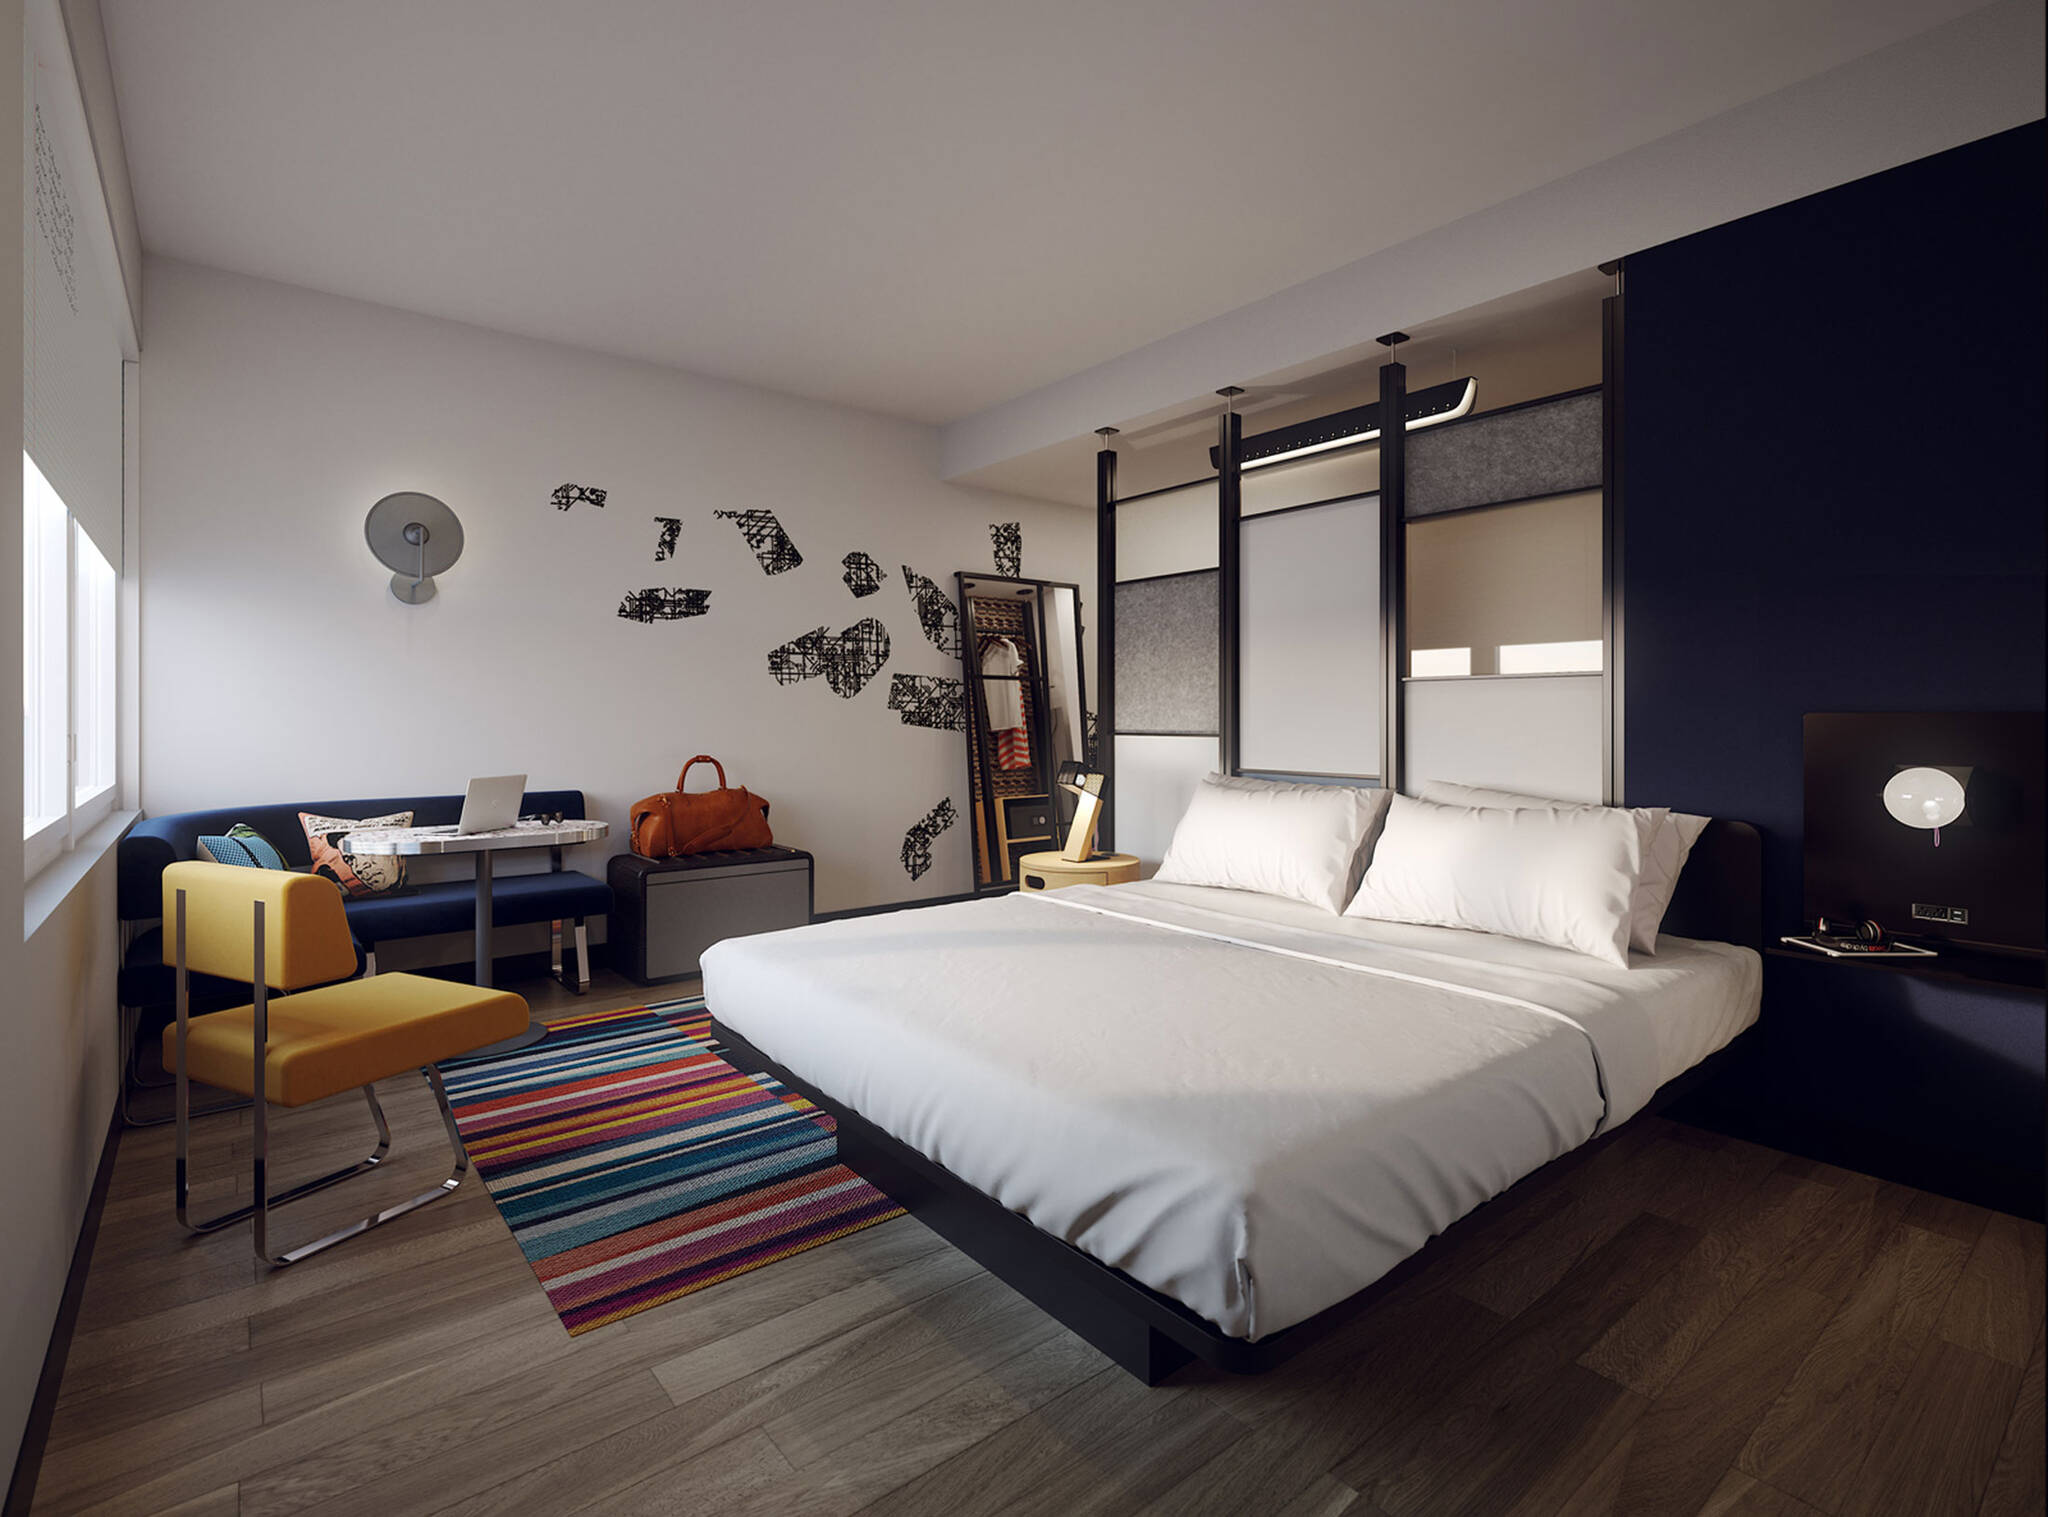 Guestroom of the Aloft hotel in the Dallas Alpha West mixed-use complex project located in Dallas, Texas designed by the architecture studio Danny Forster & Architecture